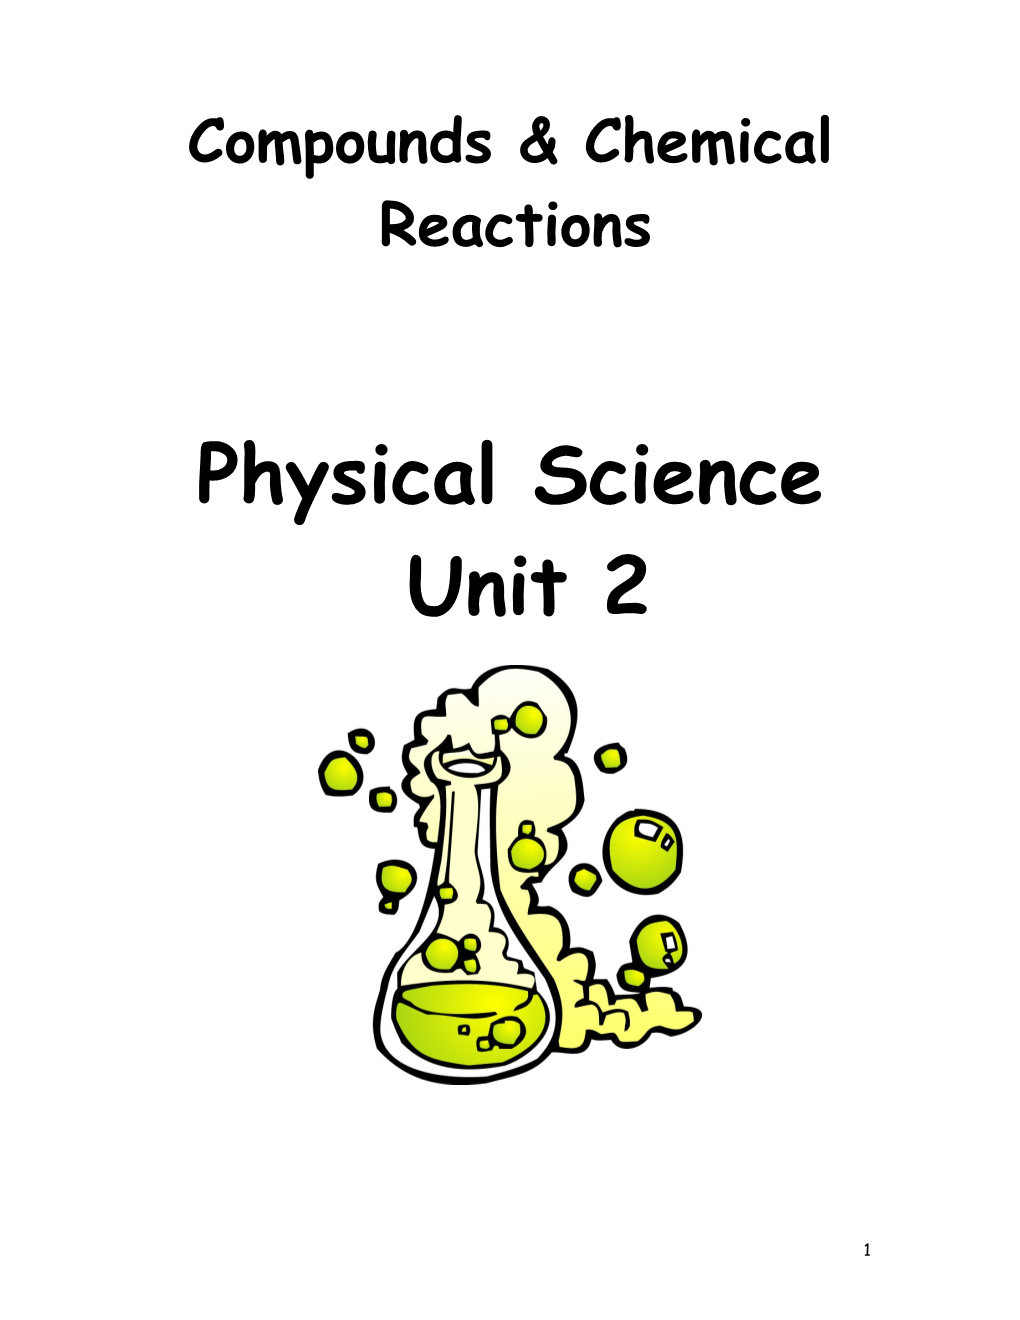 Compounds & Chemical Reactions